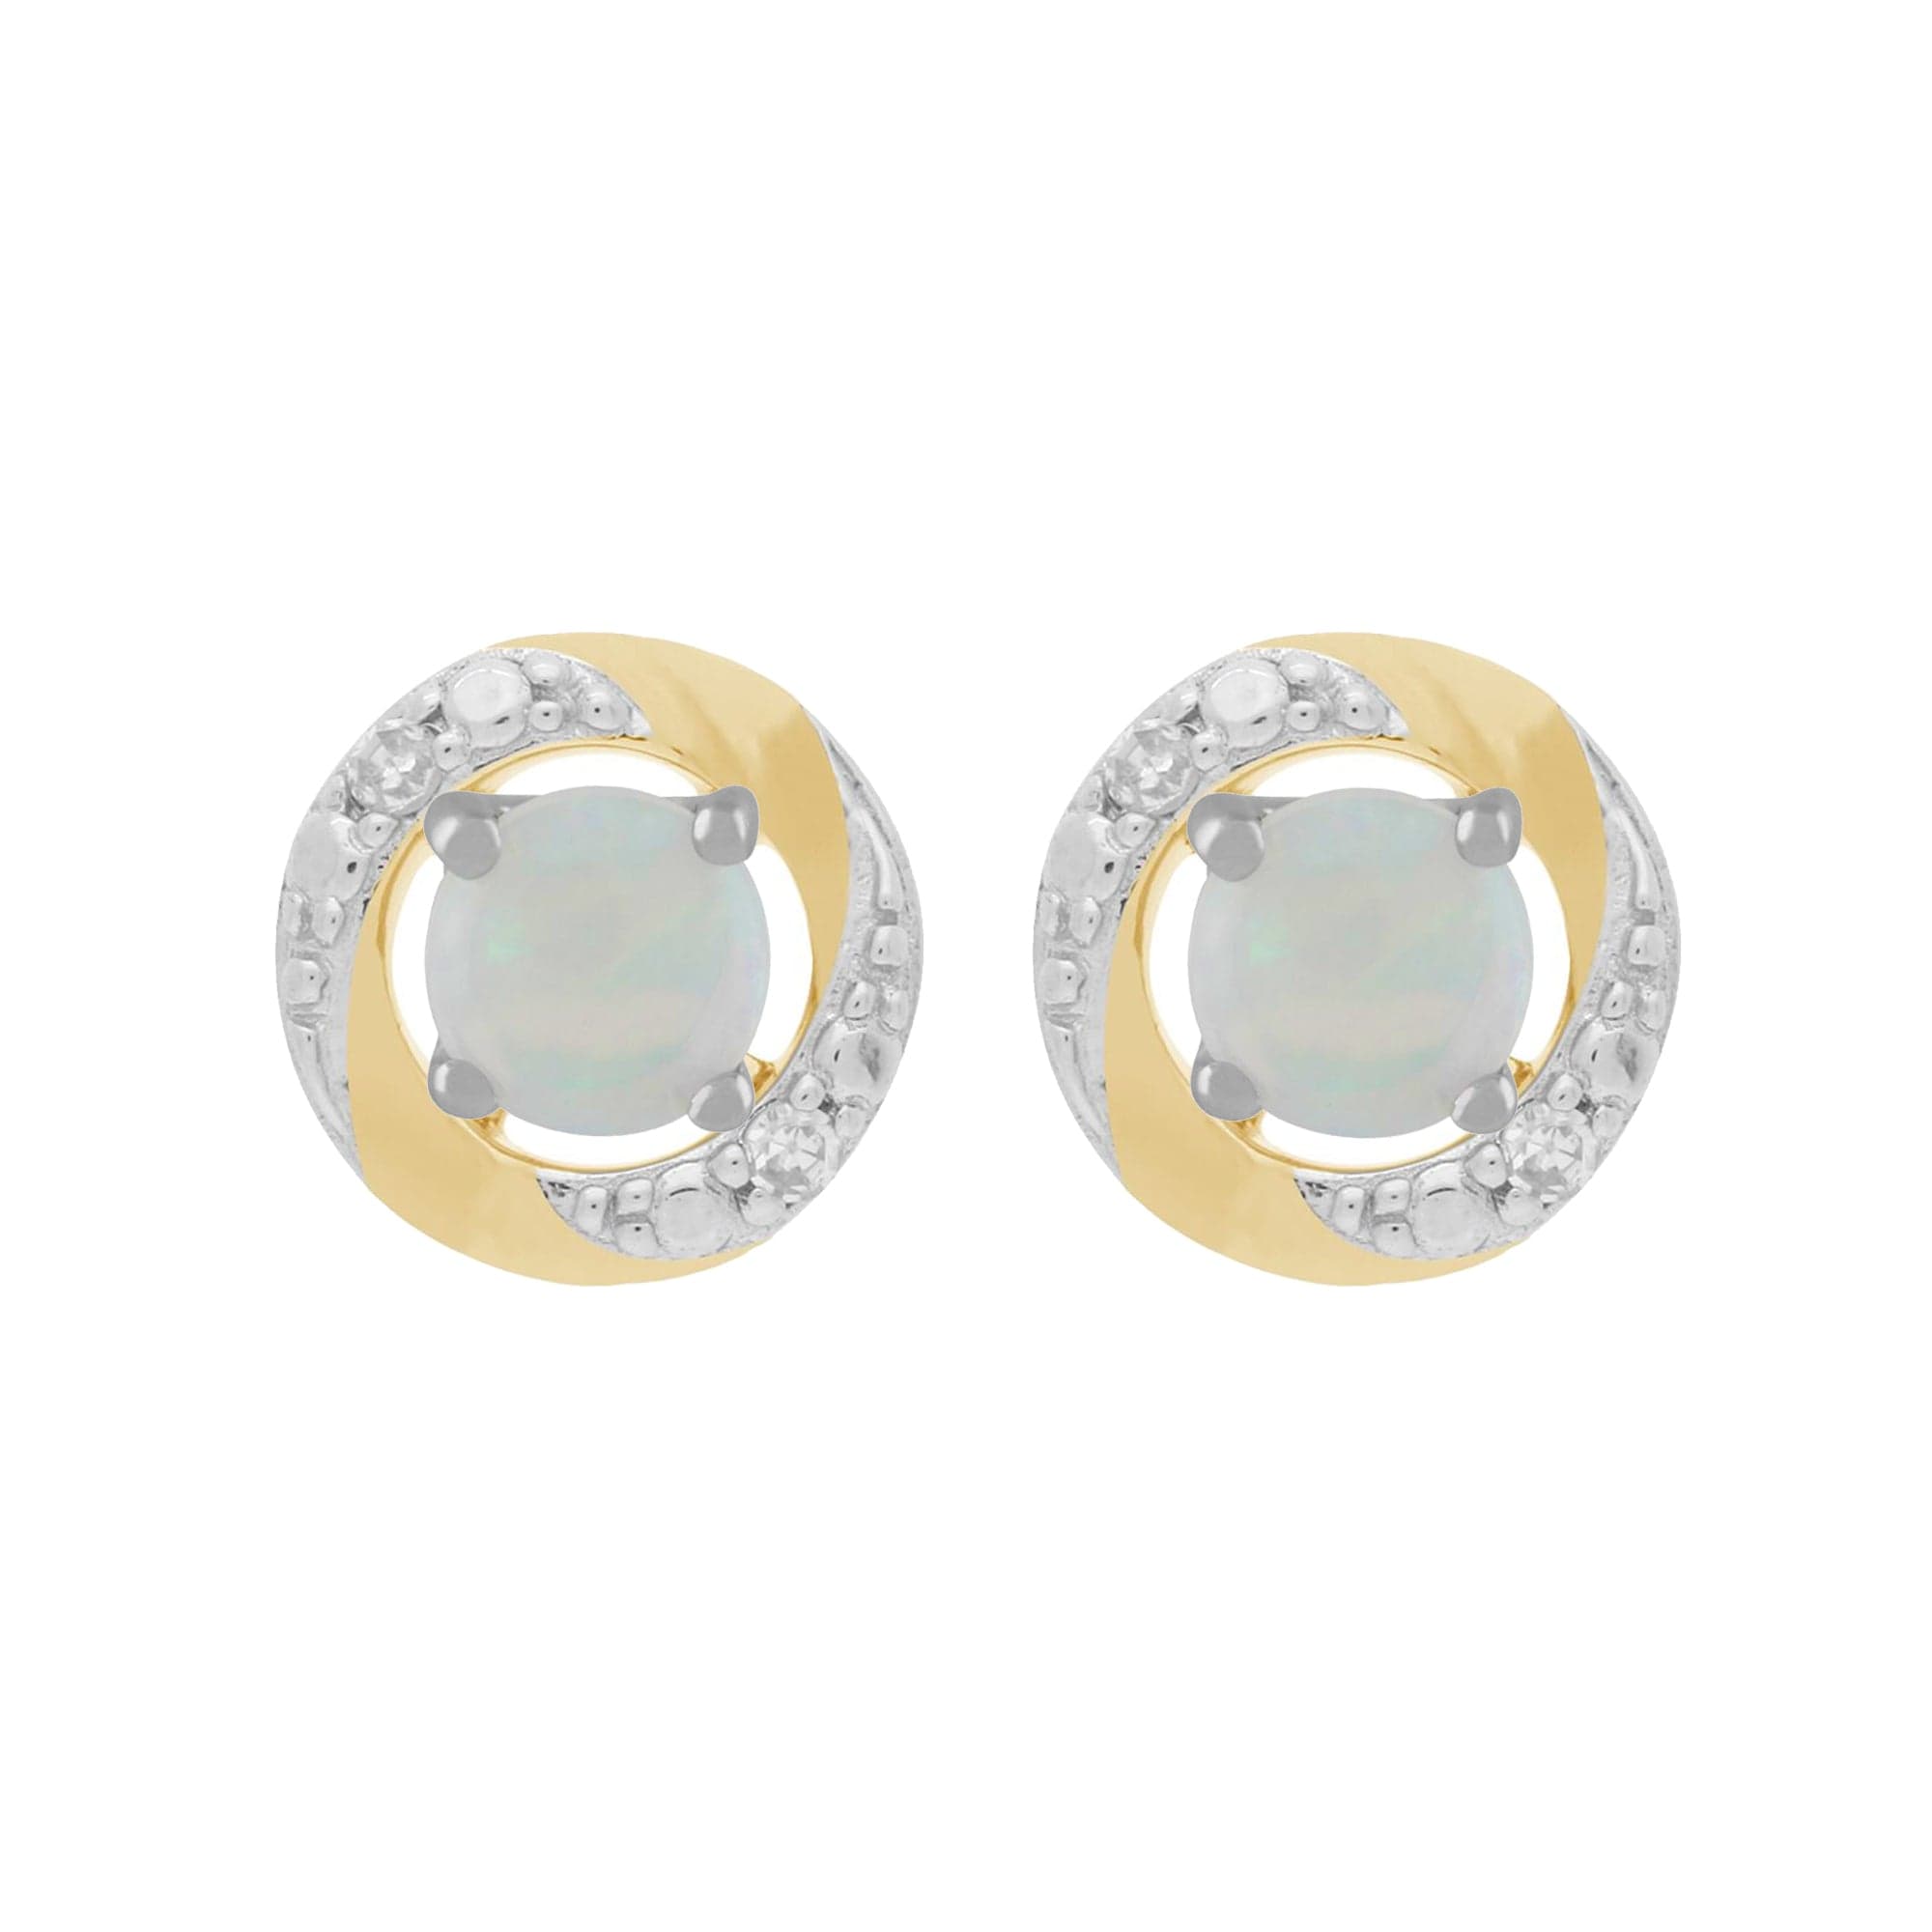 117E0031149-191E0374019 9ct White Gold Opal Stud Earrings with Detachable Diamond Halo Ear Jacket in 9ct Yellow Gold 1